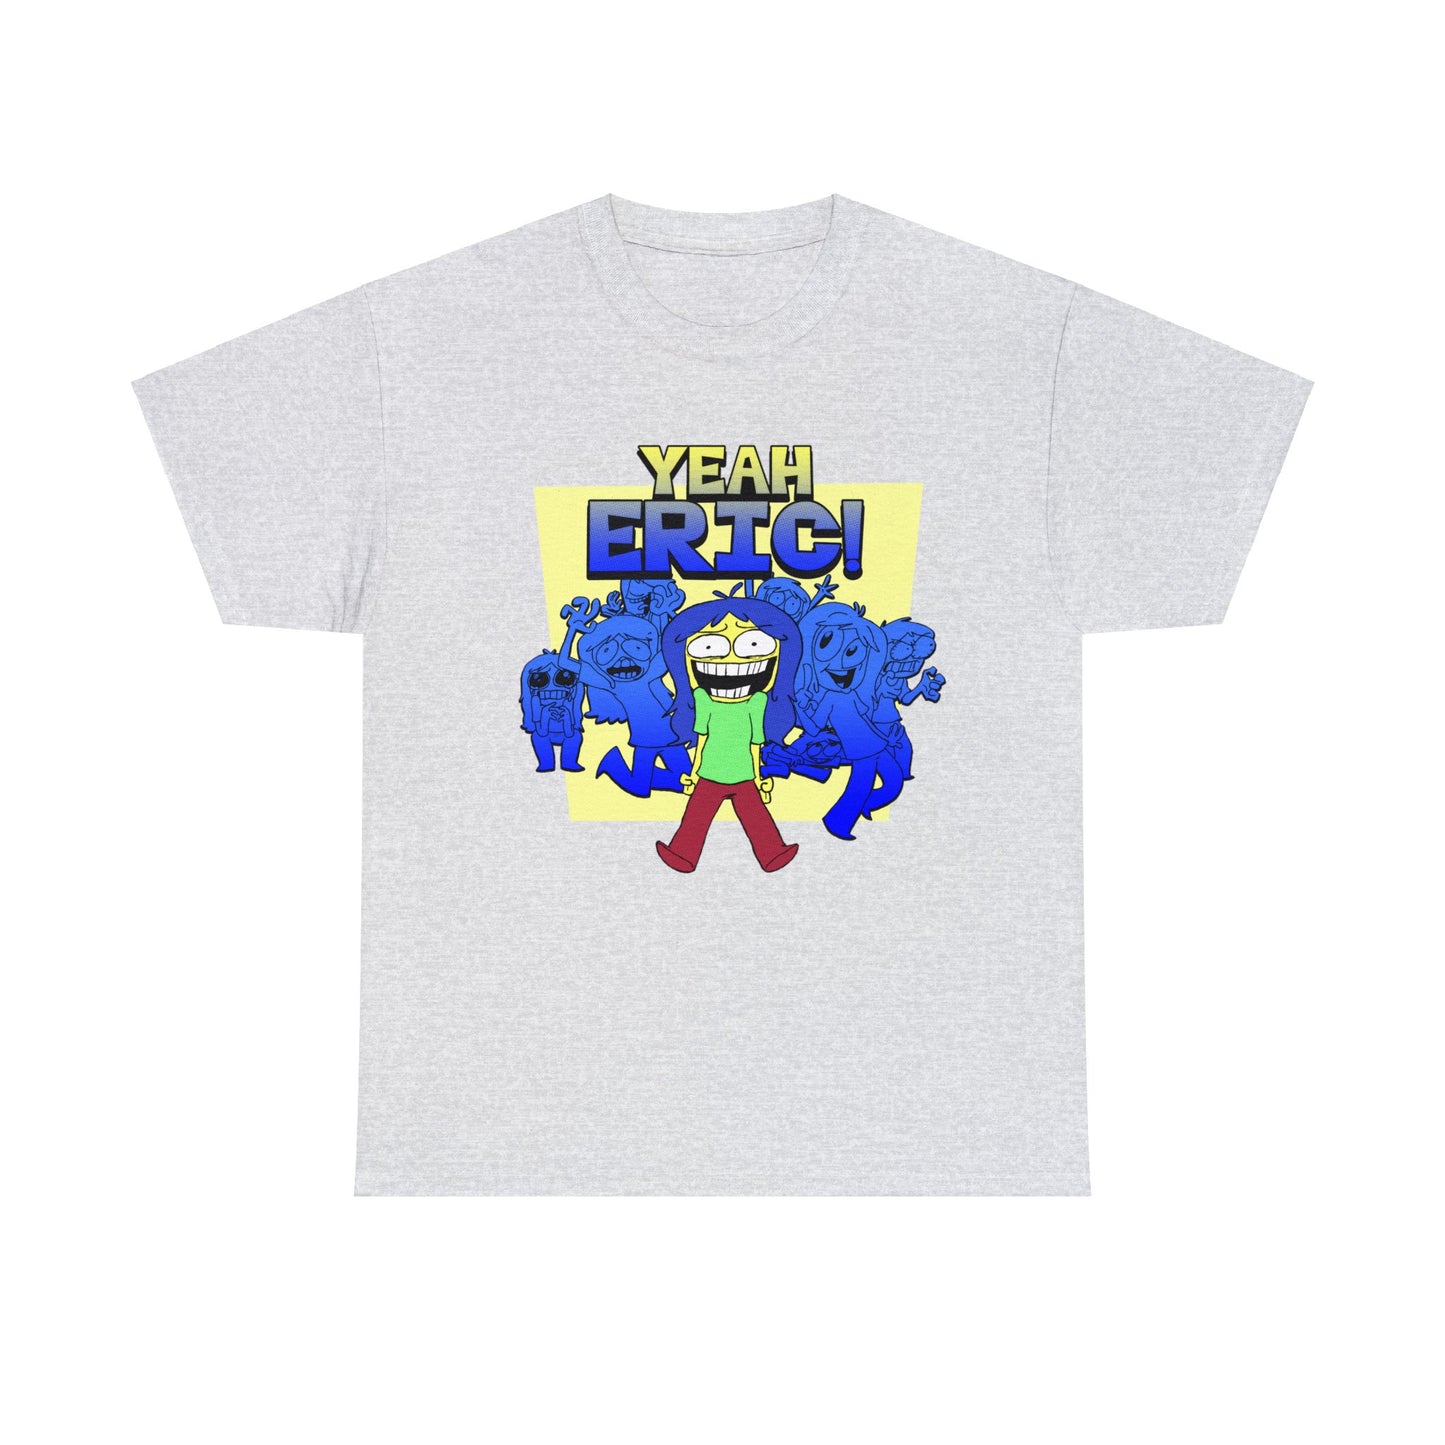 Foreign Henry T Shirt